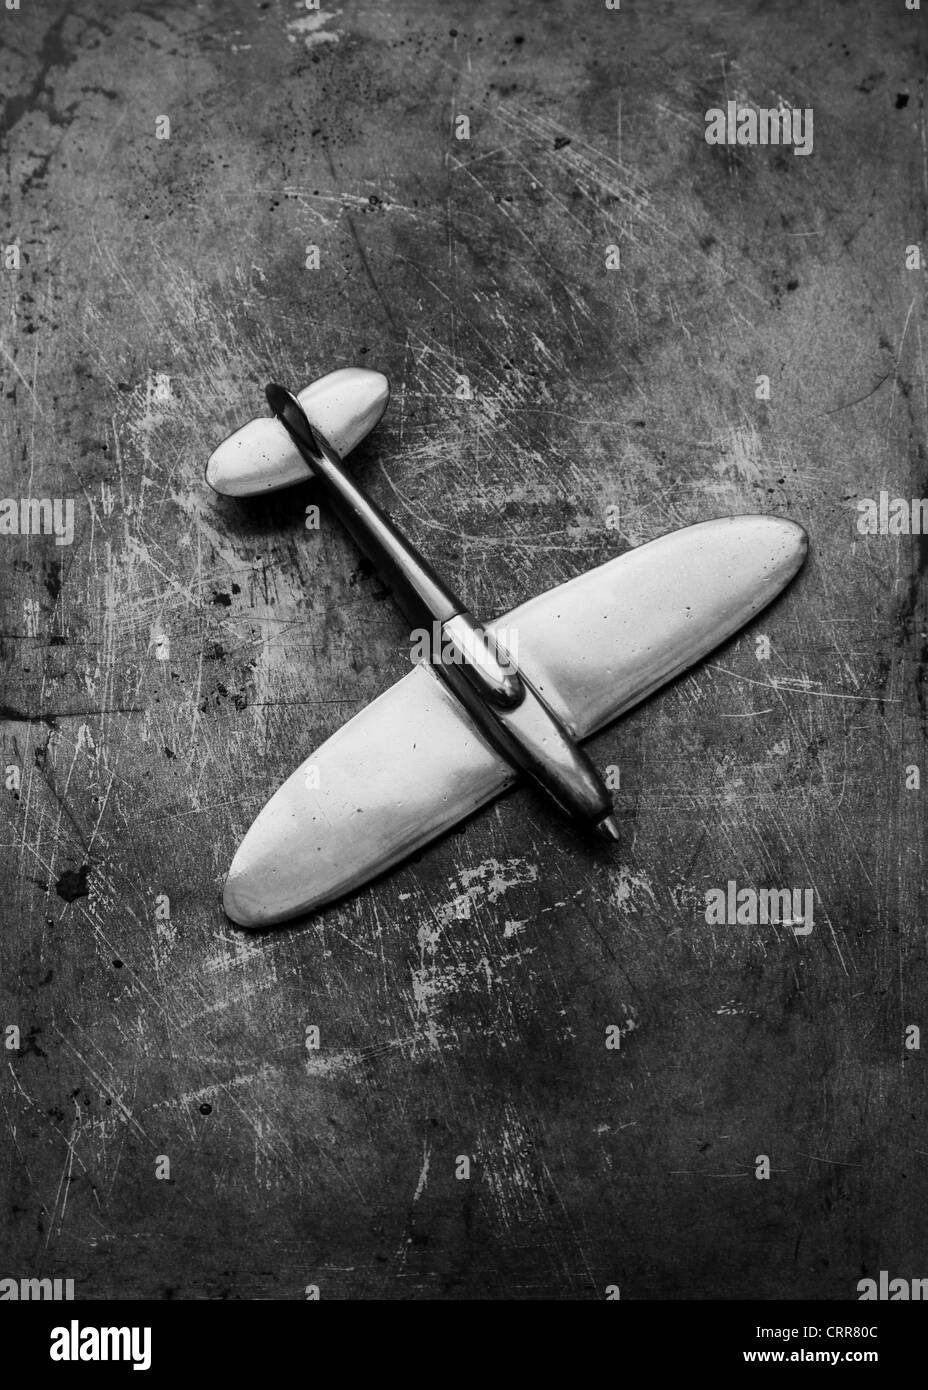 WW2 model spitfire on distressed metal background Stock Photo